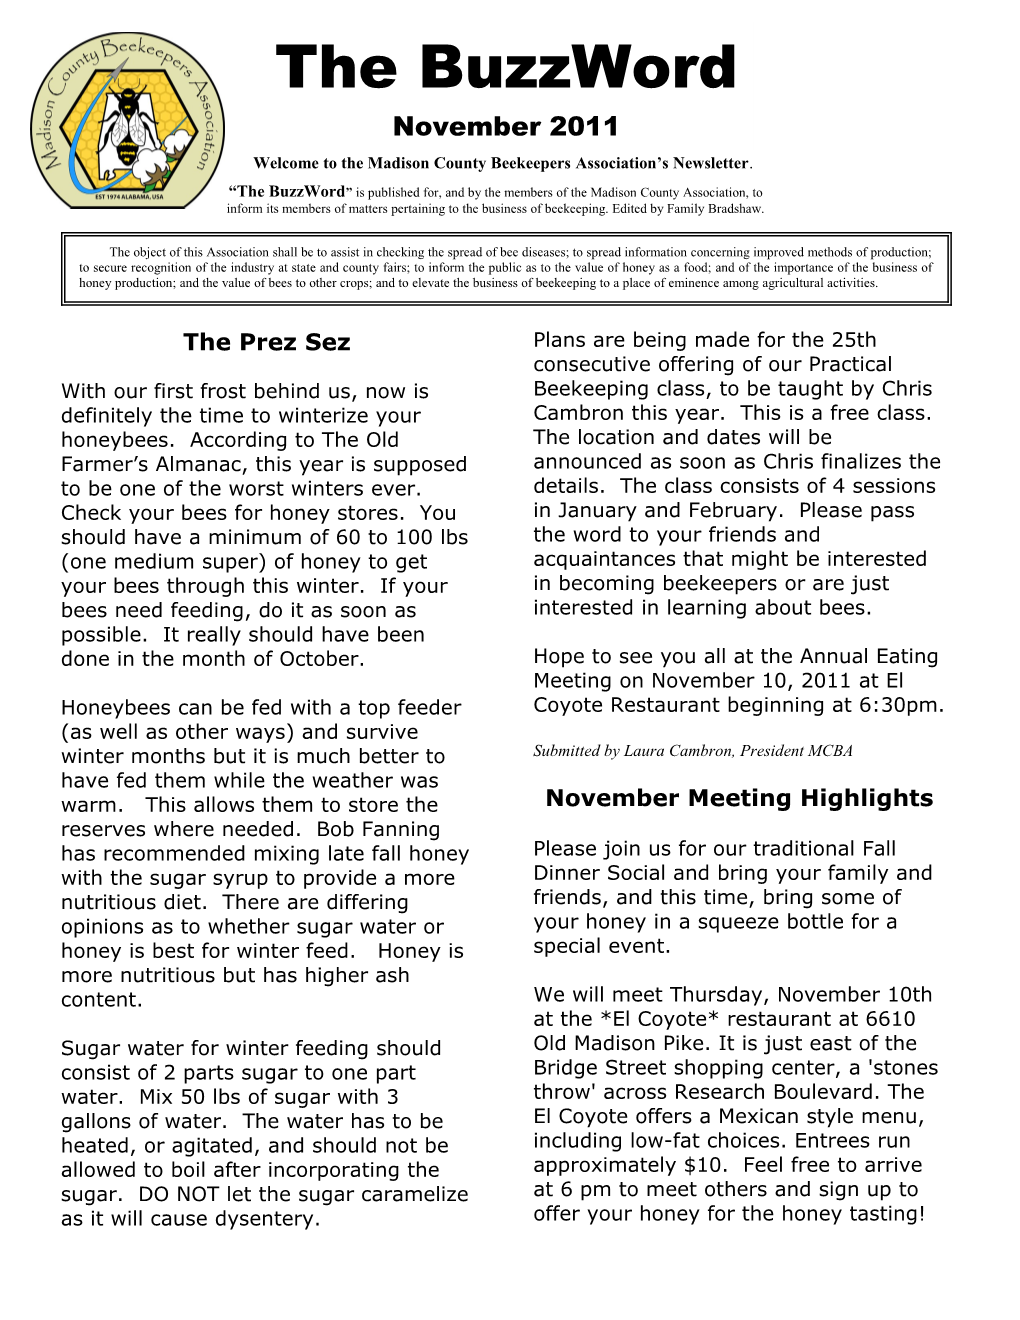 Welcome to the Madison County Beekeepers Association S Newsletter